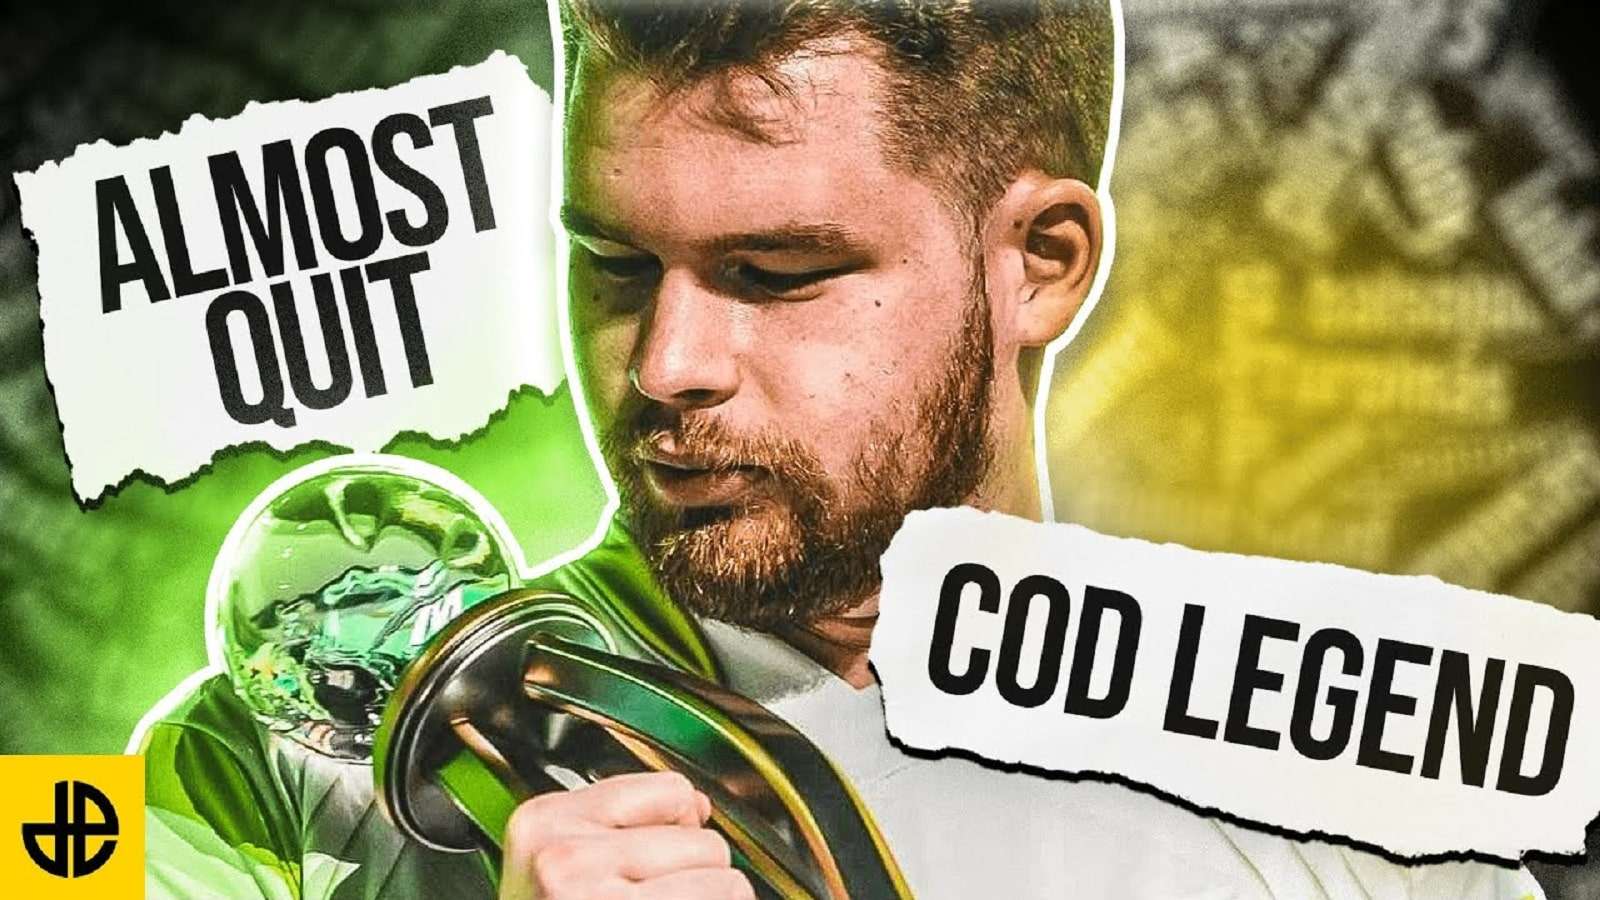 How Crimsix Became a CoD Legend After Almost Quitting YouTube Thumbnail